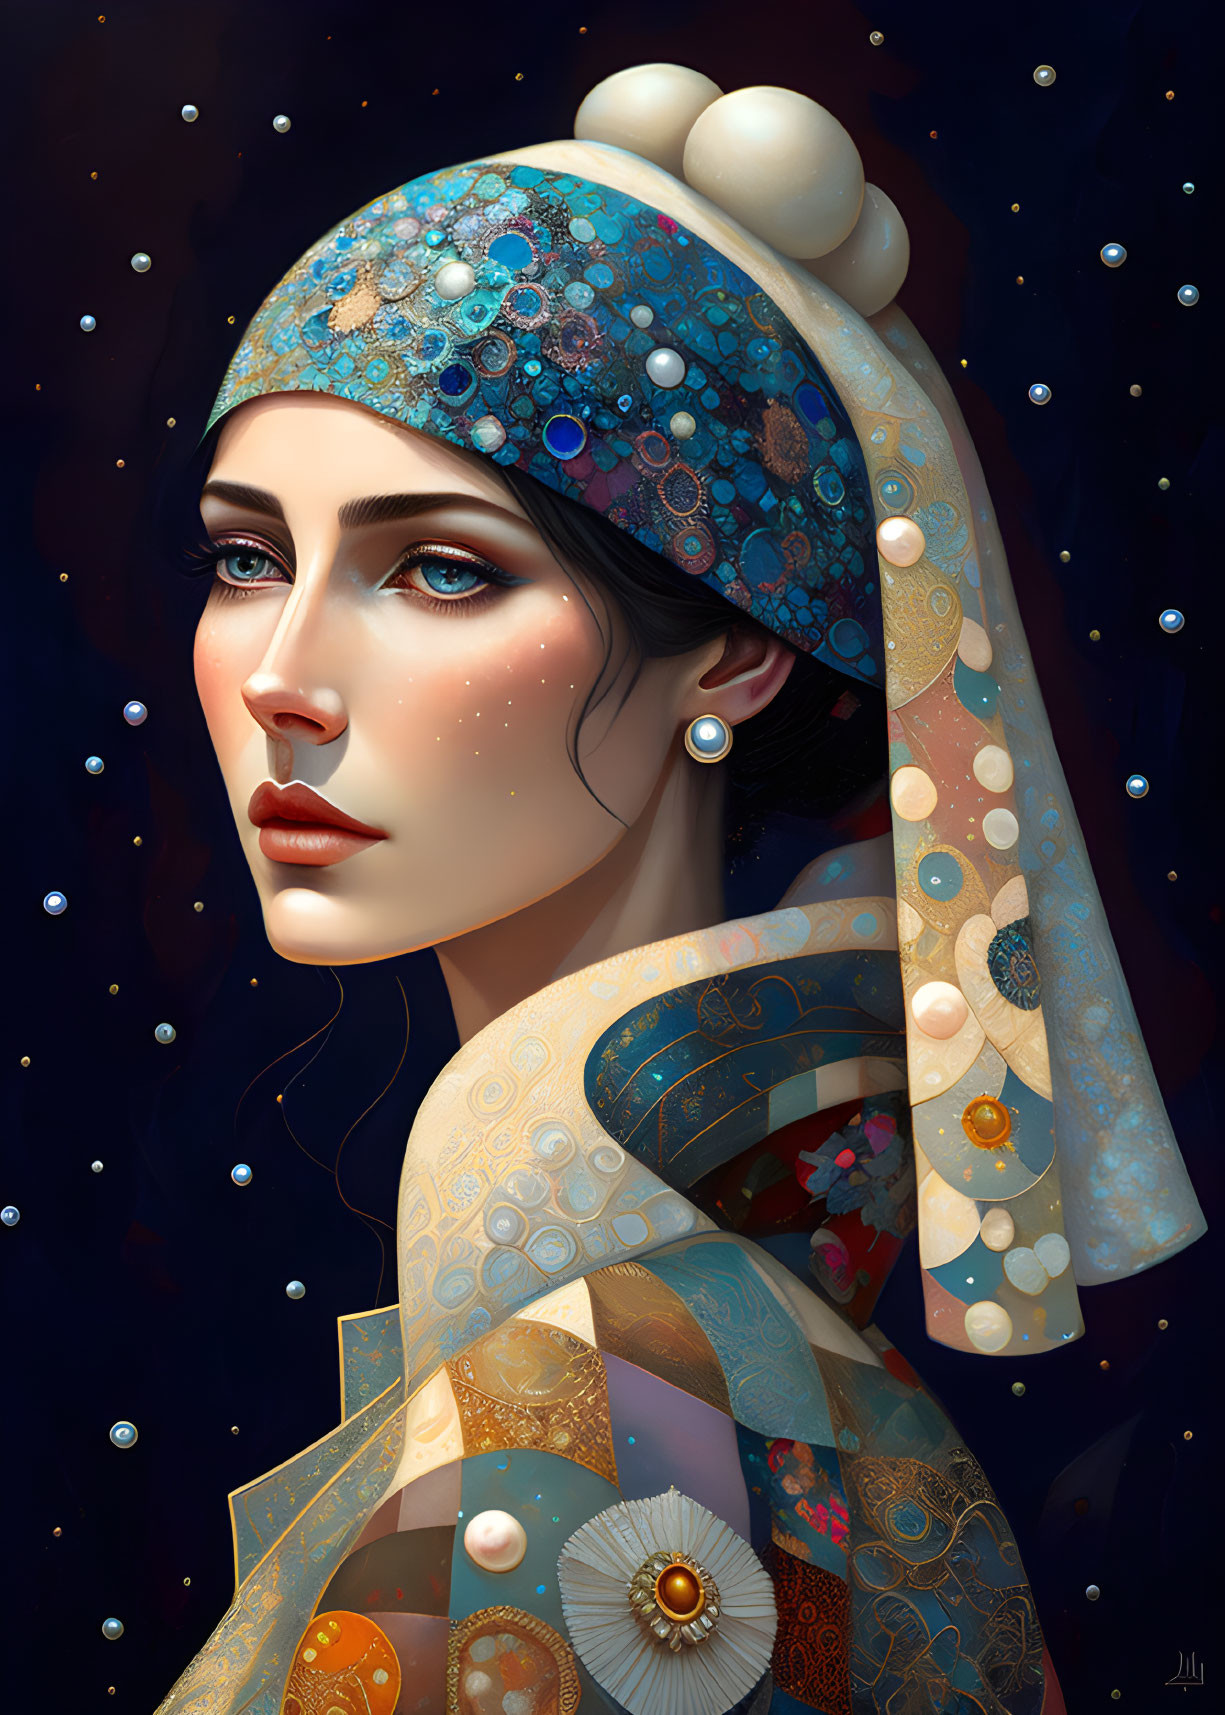 Portrait of Woman with Decorative Headpiece and Cloak Amidst Starry Background